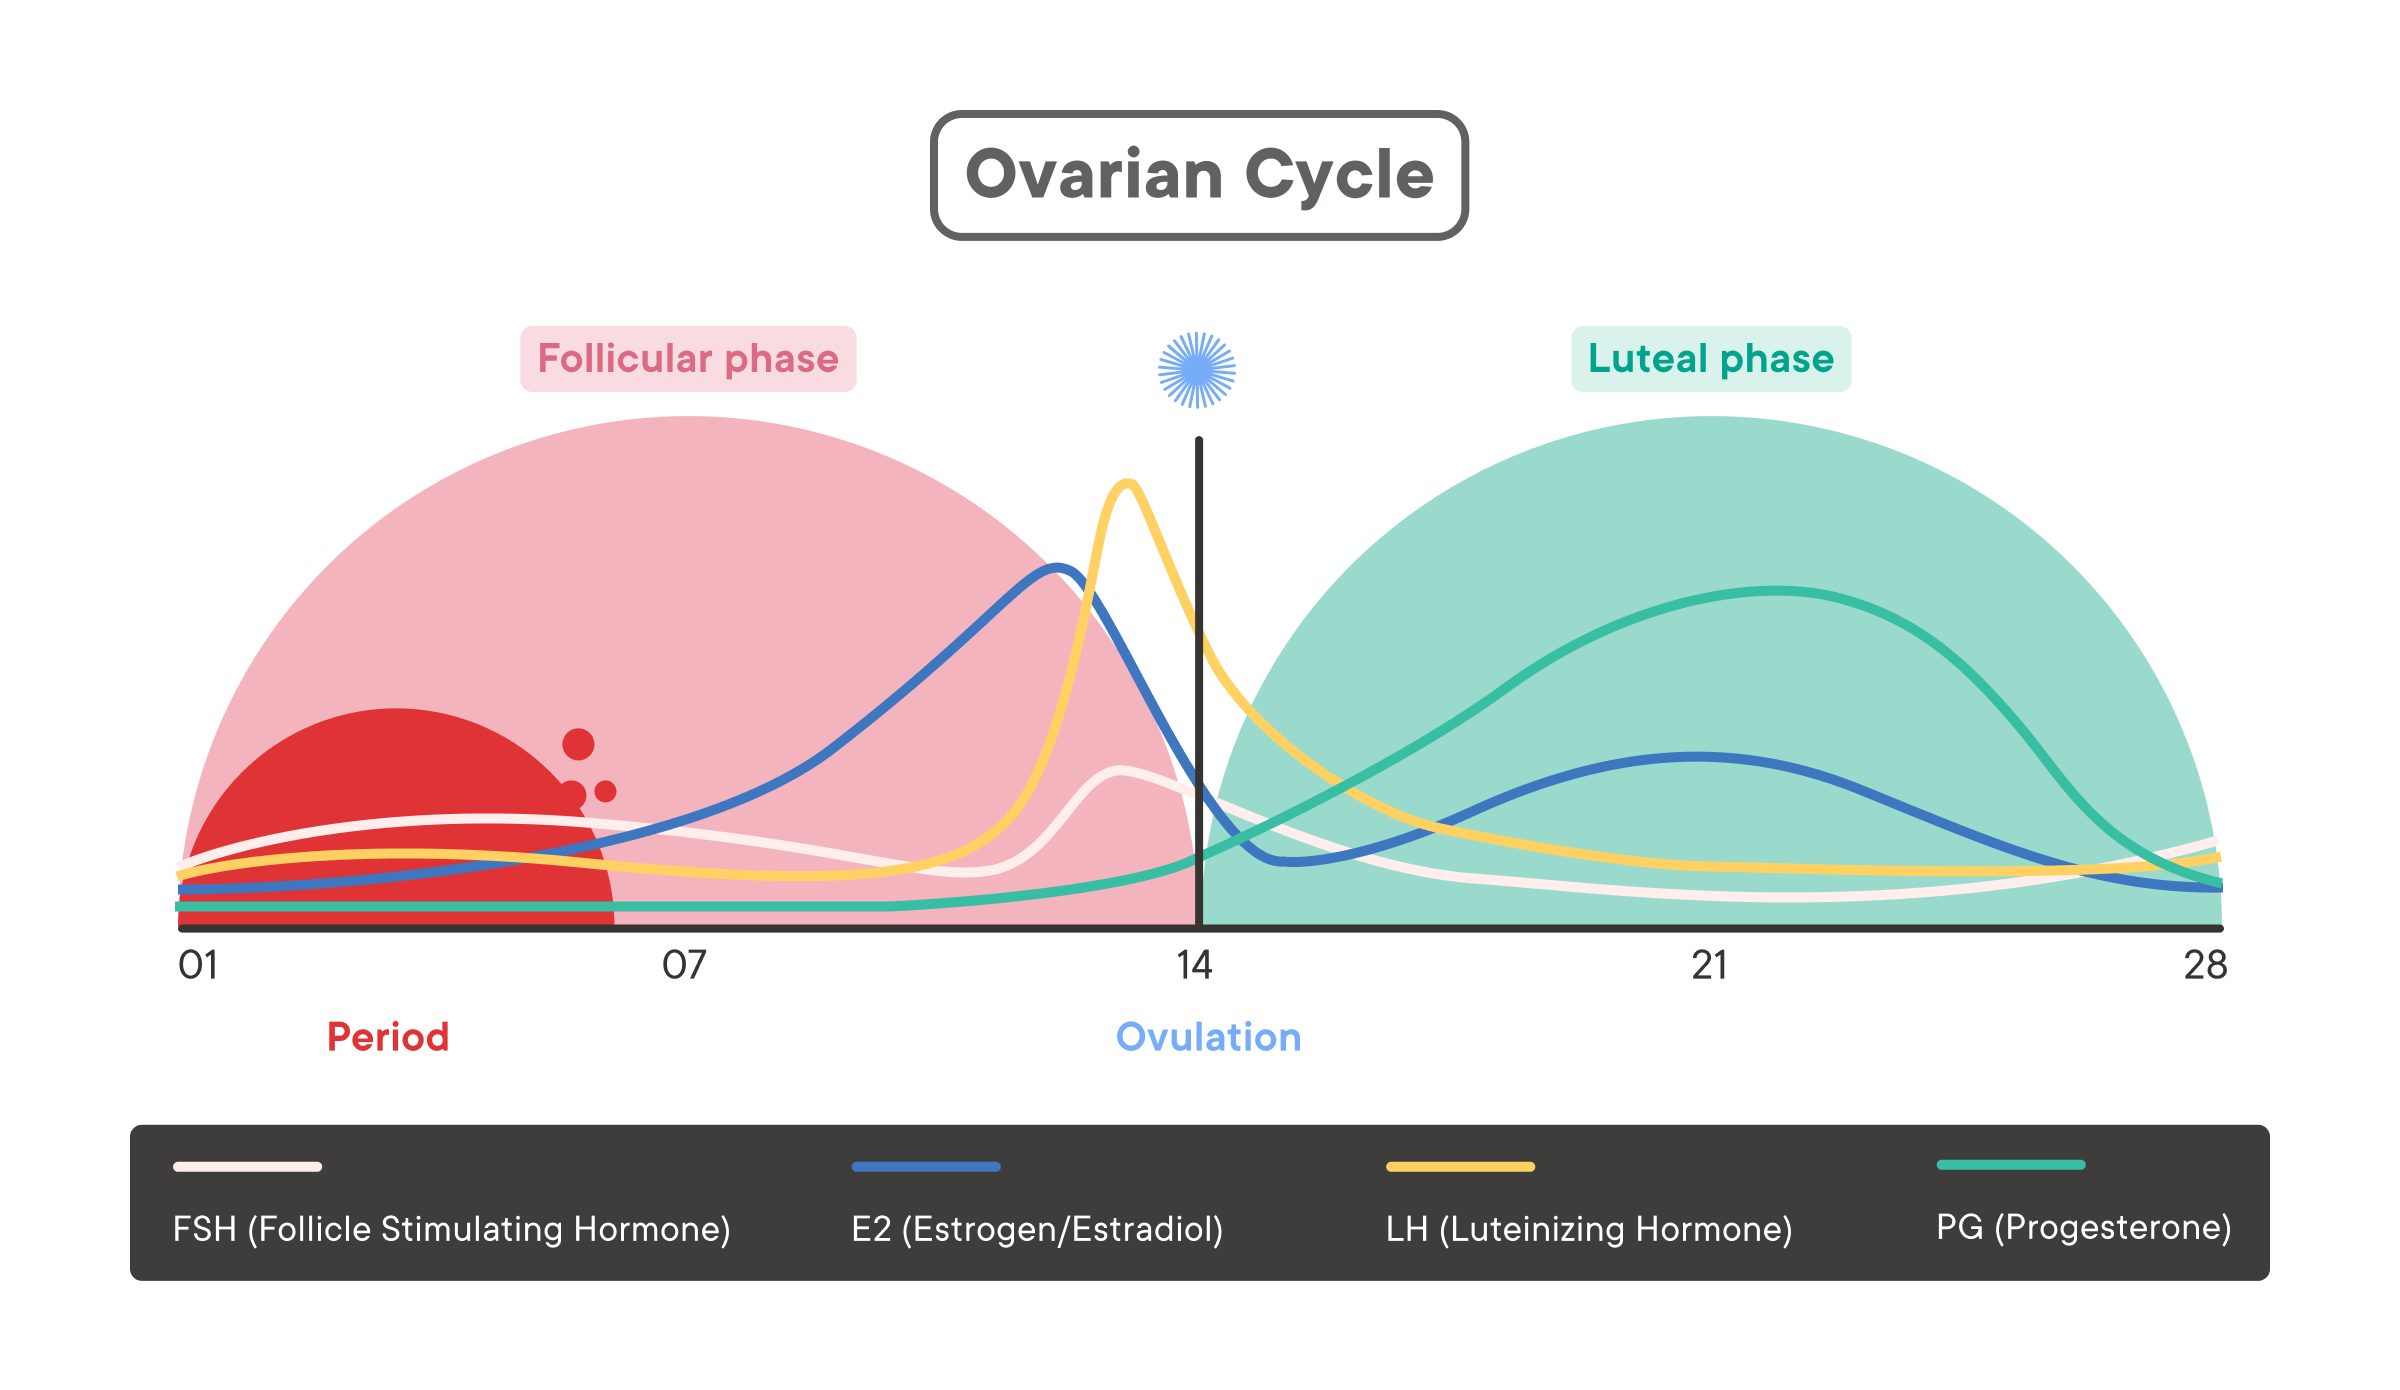 An image depicting the phases of the ovarian or menstrual cycle. The cycle is divided into four main phases: Menstrual, Follicular, Ovulation, and Luteal. In the Menstrual phase, the uterus sheds its lining, resulting in bleeding. The Follicular phase is characterized by the growth of follicles in the ovary, with rising estrogen levels. Ovulation occurs when a mature follicle releases an egg into the fallopian tube. The Luteal phase follows ovulation and involves the formation of the corpus luteum, which produces progesterone. Hormone peaks during the cycle include a significant rise in estrogen during the Follicular phase, a surge in luteinizing hormone (LH) just before ovulation, increased progesterone levels during the Luteal phase, and minor fluctuations in testosterone throughout the cycle. 